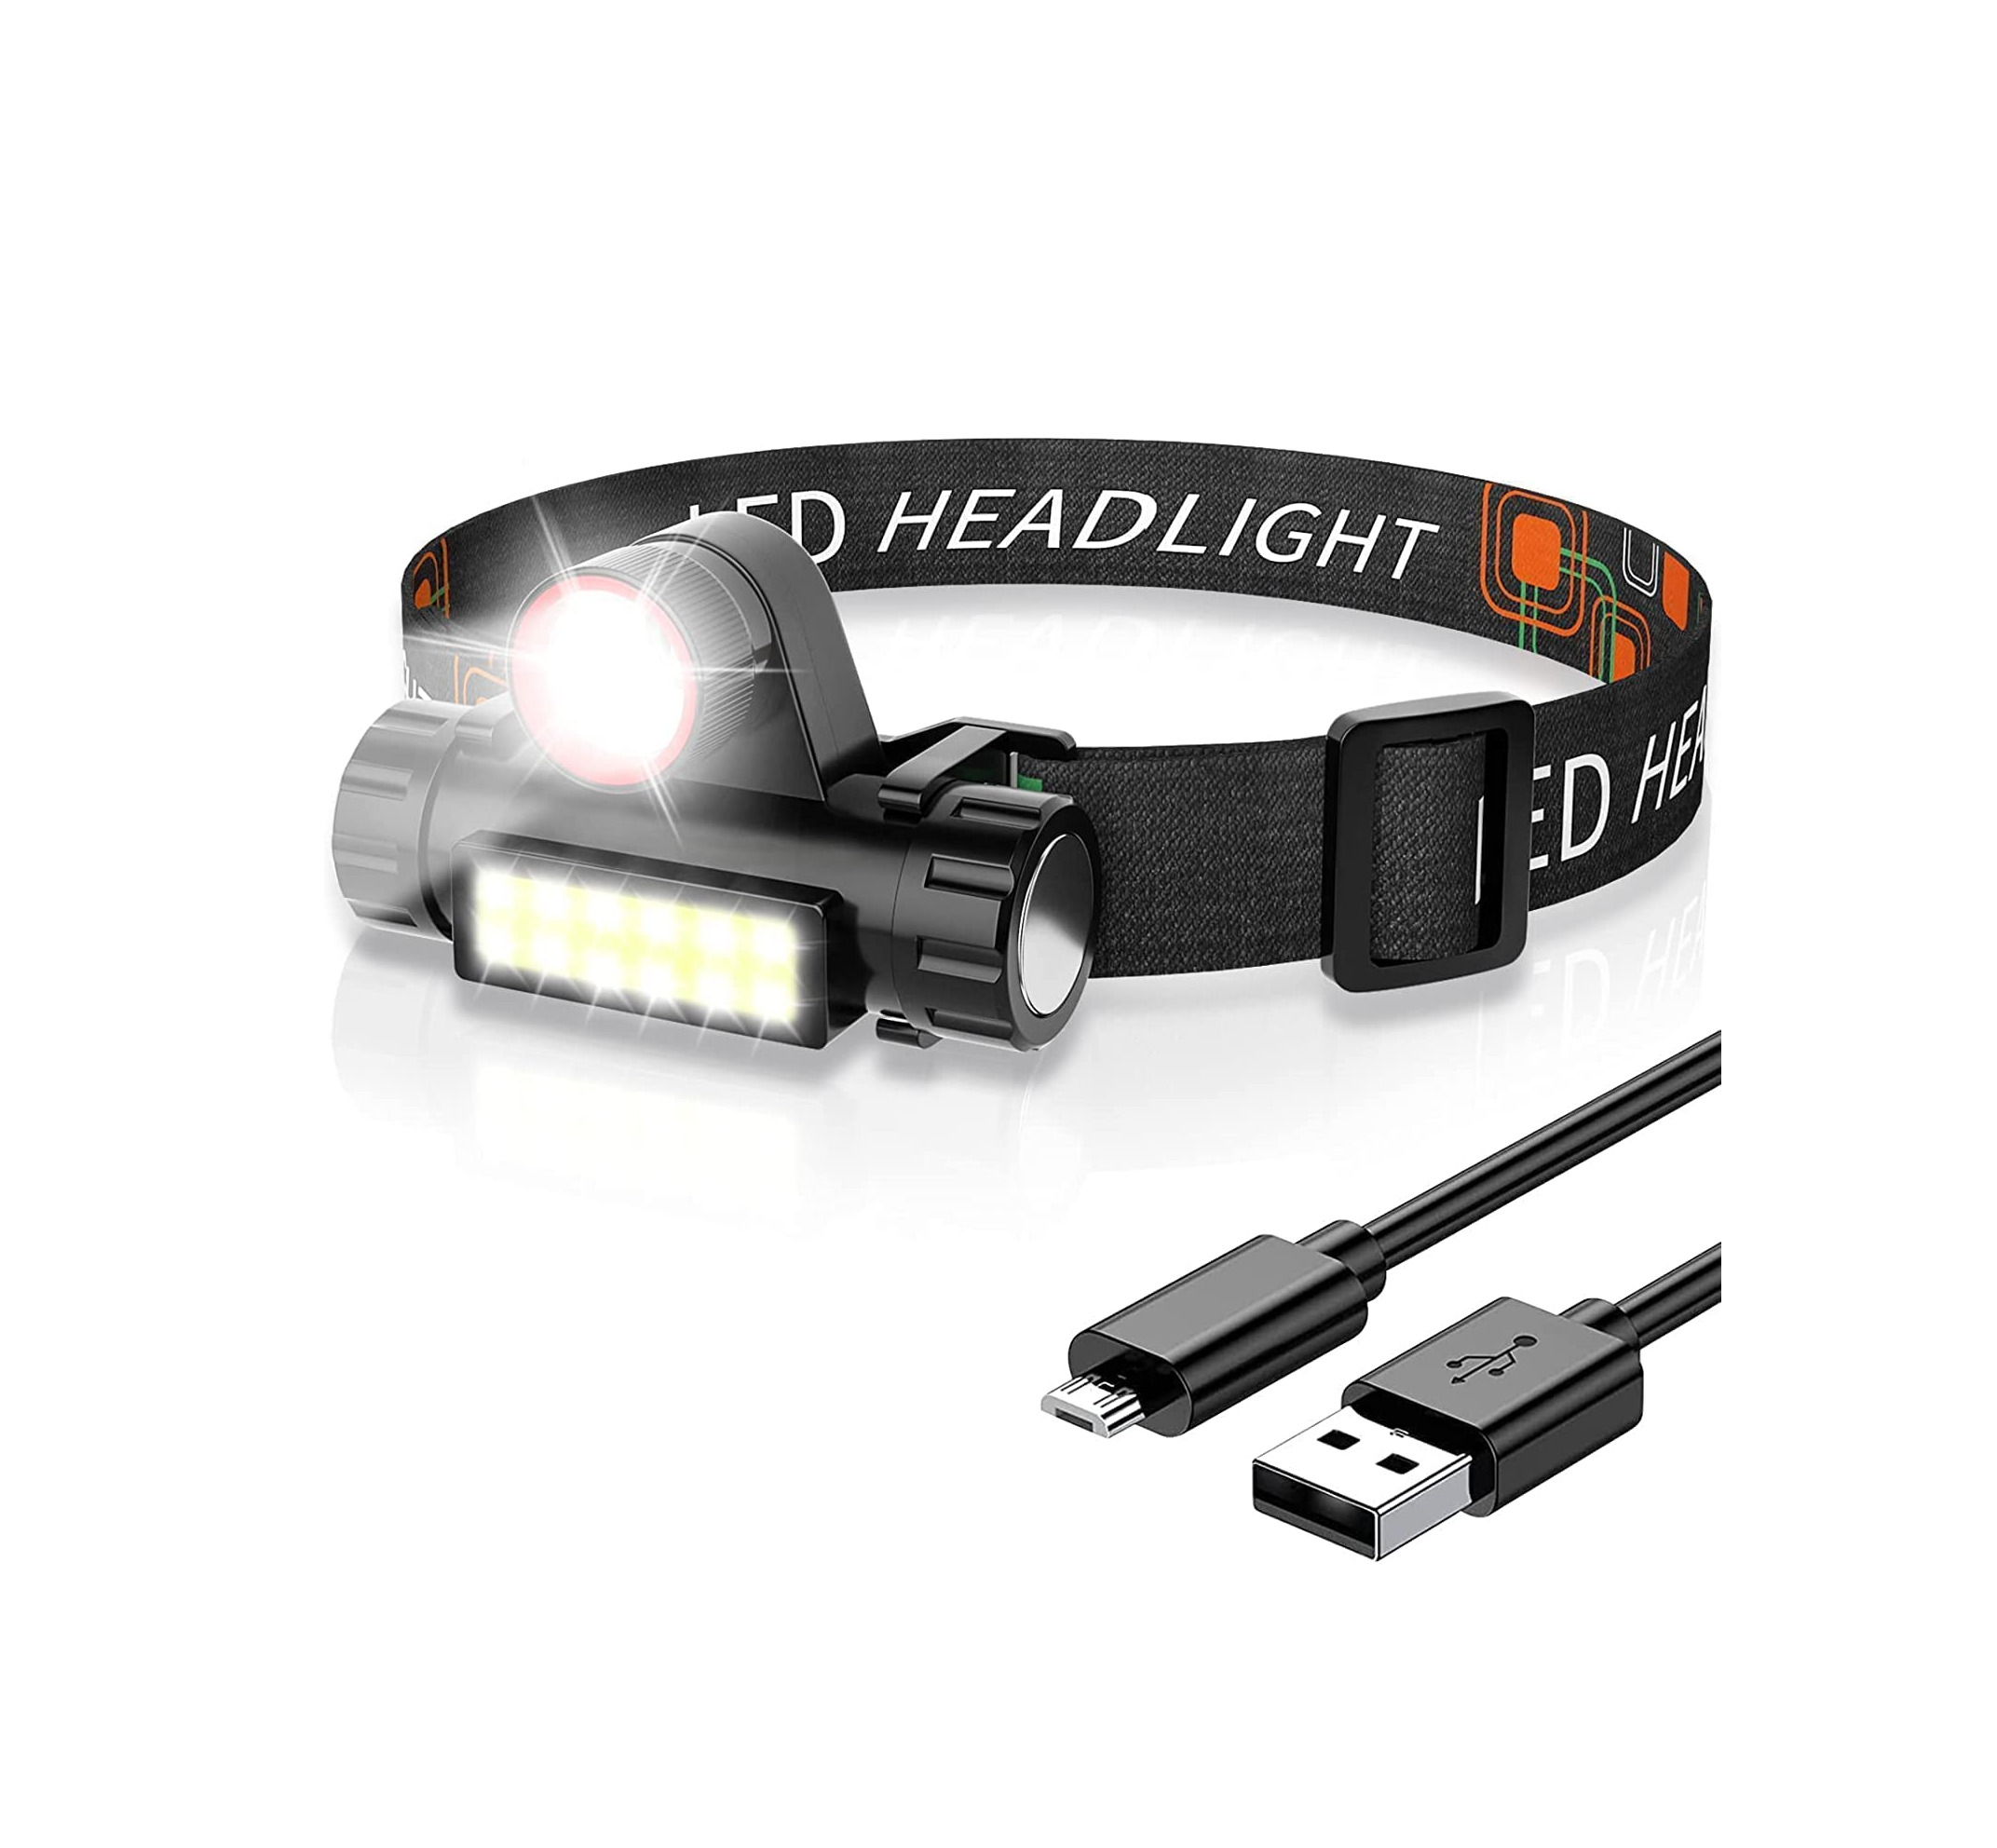 UltraBeam Pro: Rechargeable Head Torch with 4 Lighting Modes, Zoomable🔦 Zoomable Headlamp &amp; Powerful Beam 🌄 Unique zoomable design for adjustable beam size and distance. COB Flood light-Spotlight-MAX High light-Strobe (SOS) modes